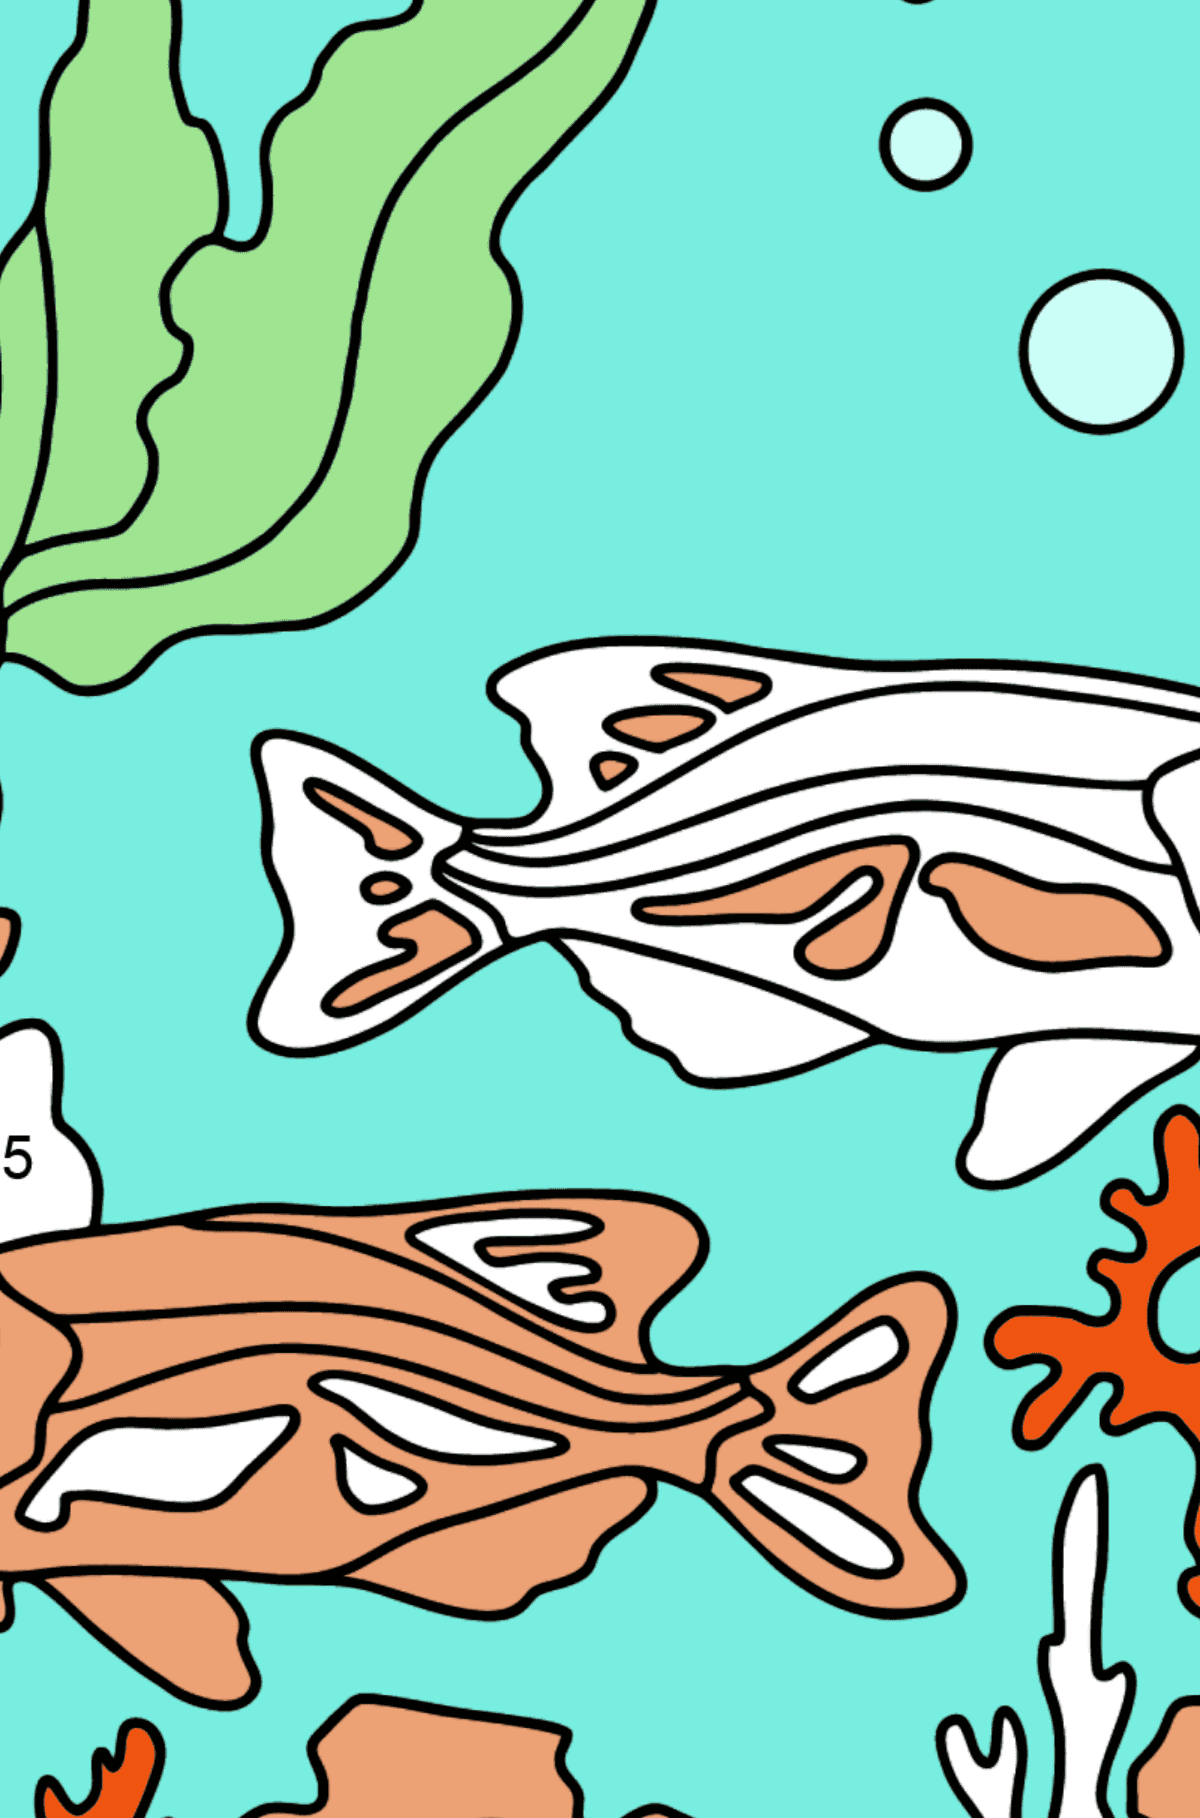 Coloring Page - Fish are Swimming - Math Coloring - Subtraction for Kids